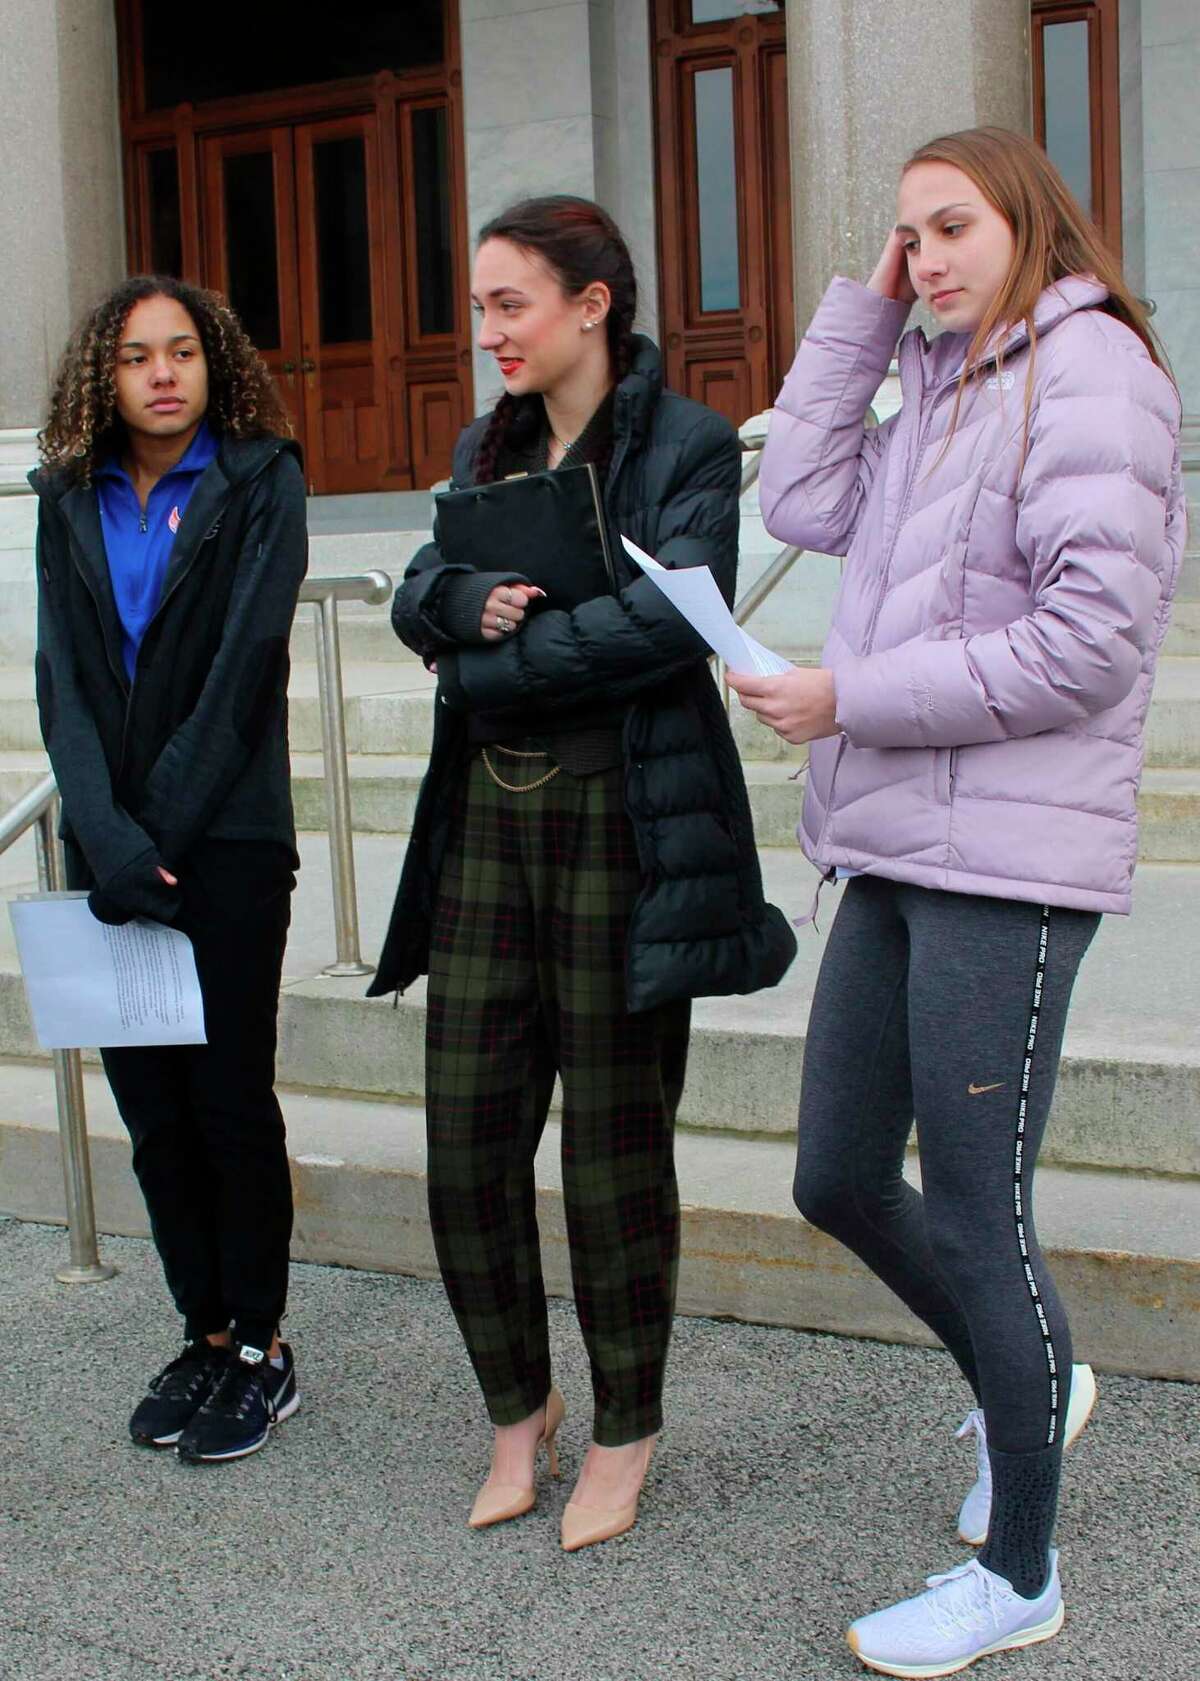 FILE - In this Feb. 12, 2020 file photo, high school track athletes Alanna Smith, left, Selina Soule, center and and Chelsea Mitchell prepare to speak at a news conference outside the Connecticut State Capitol in Hartford, Conn. The three girls have filed a federal lawsuit to block a state policy that allows transgender athletes to compete in girls sports. In a response to their lawsuit, the Connecticut Interscholastic Athletic Conference argued in a court filing that it is not subject to the federal law that guarantees equal access to women and girls in education, including athletics. (AP Photo/Pat Eaton-Robb, File)